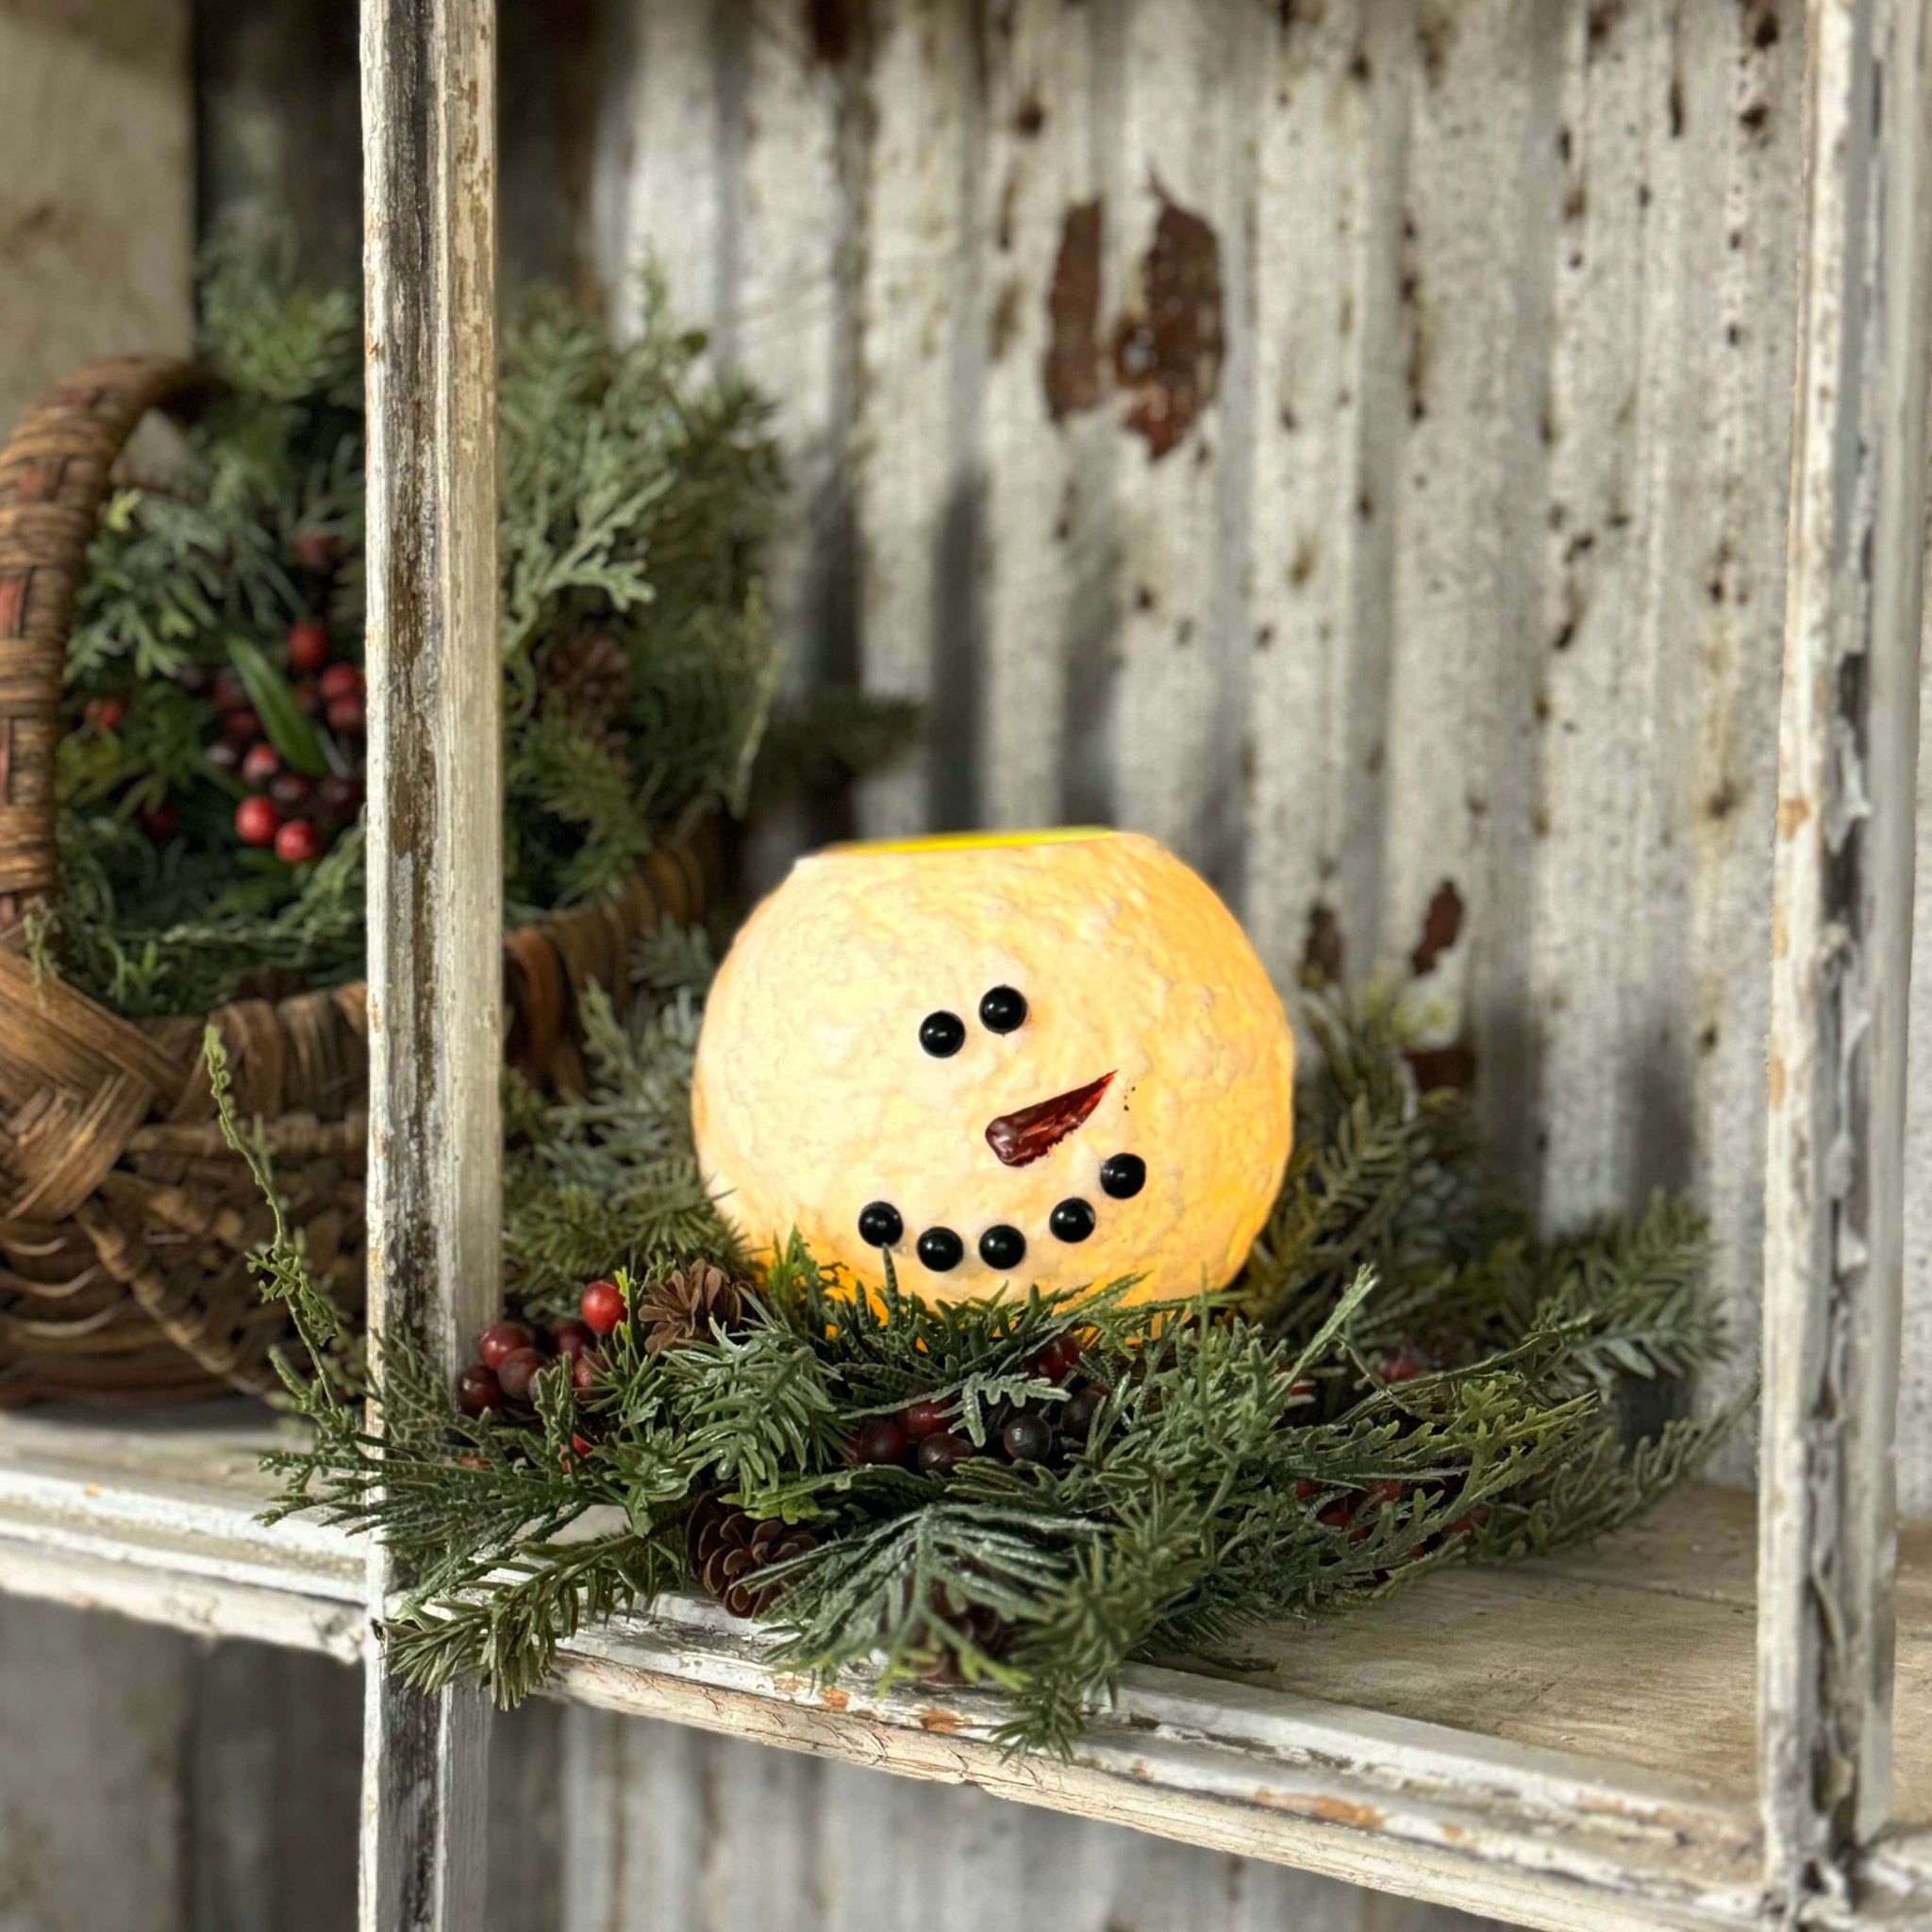 Frank the Round Snowman Candle - 6 Hour Timer Feature Accent Lighting, Candles, Country Lighting, Farmhouse Lighting, Farmhouse Winter Decor, Lighting, Primitive Candles, Primitive Lighting, Primitive Winter Decor, Timer Battery Candles, Winter, Winter Candles, Winter Decor, Winter Decorating, Winter Farmhouse Decor 